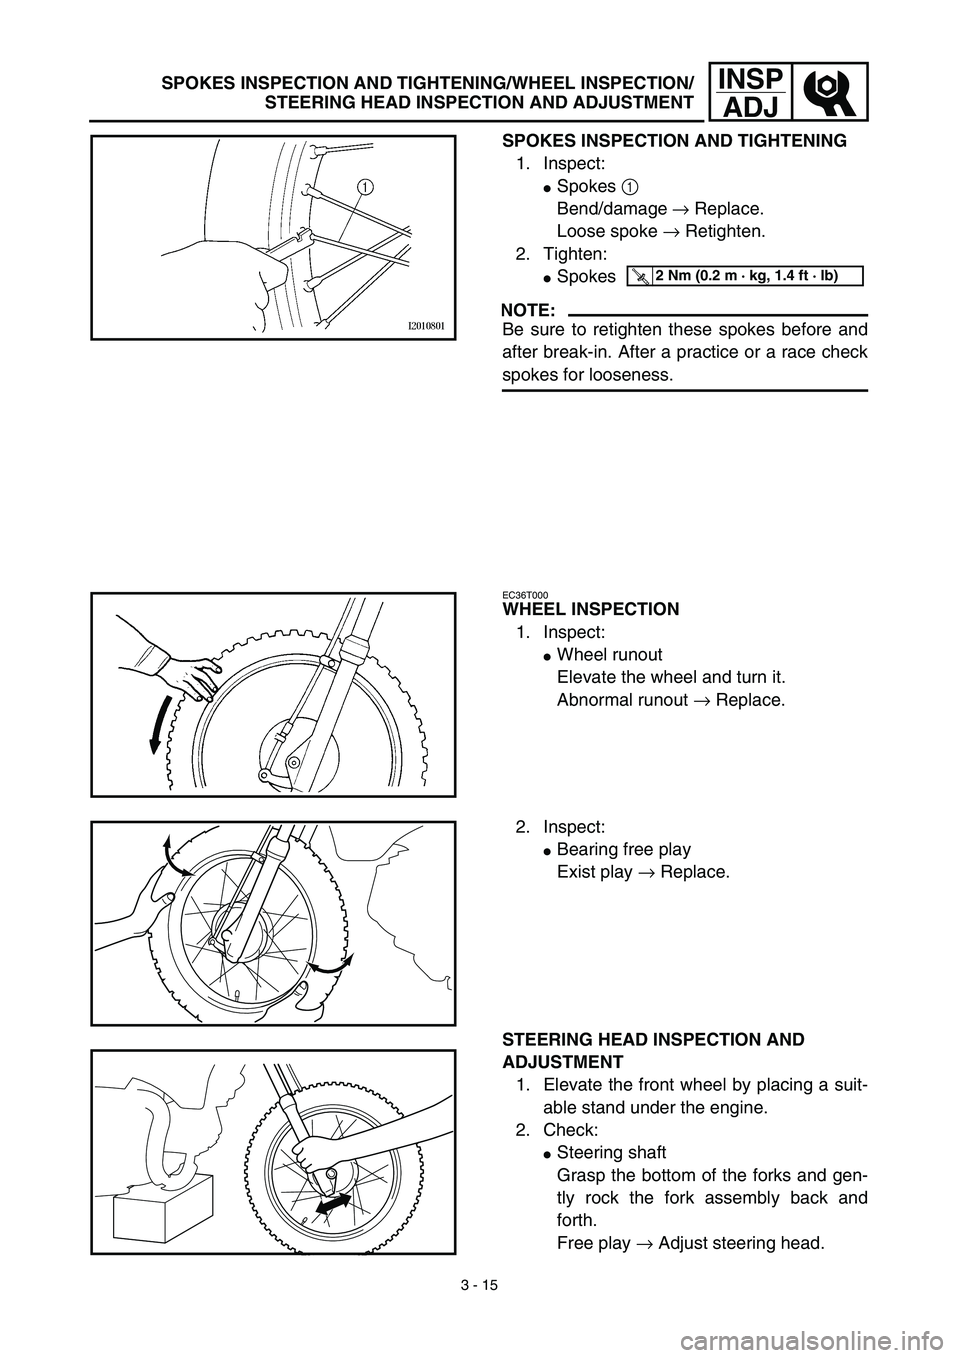 YAMAHA TTR90 2003  Owners Manual 3 - 15
INSP
ADJSPOKES INSPECTION AND TIGHTENING/WHEEL INSPECTION/
STEERING HEAD INSPECTION AND ADJUSTMENT
SPOKES INSPECTION AND TIGHTENING
1. Inspect:
Spokes 1 
Bend/damage → Replace.
Loose spoke �